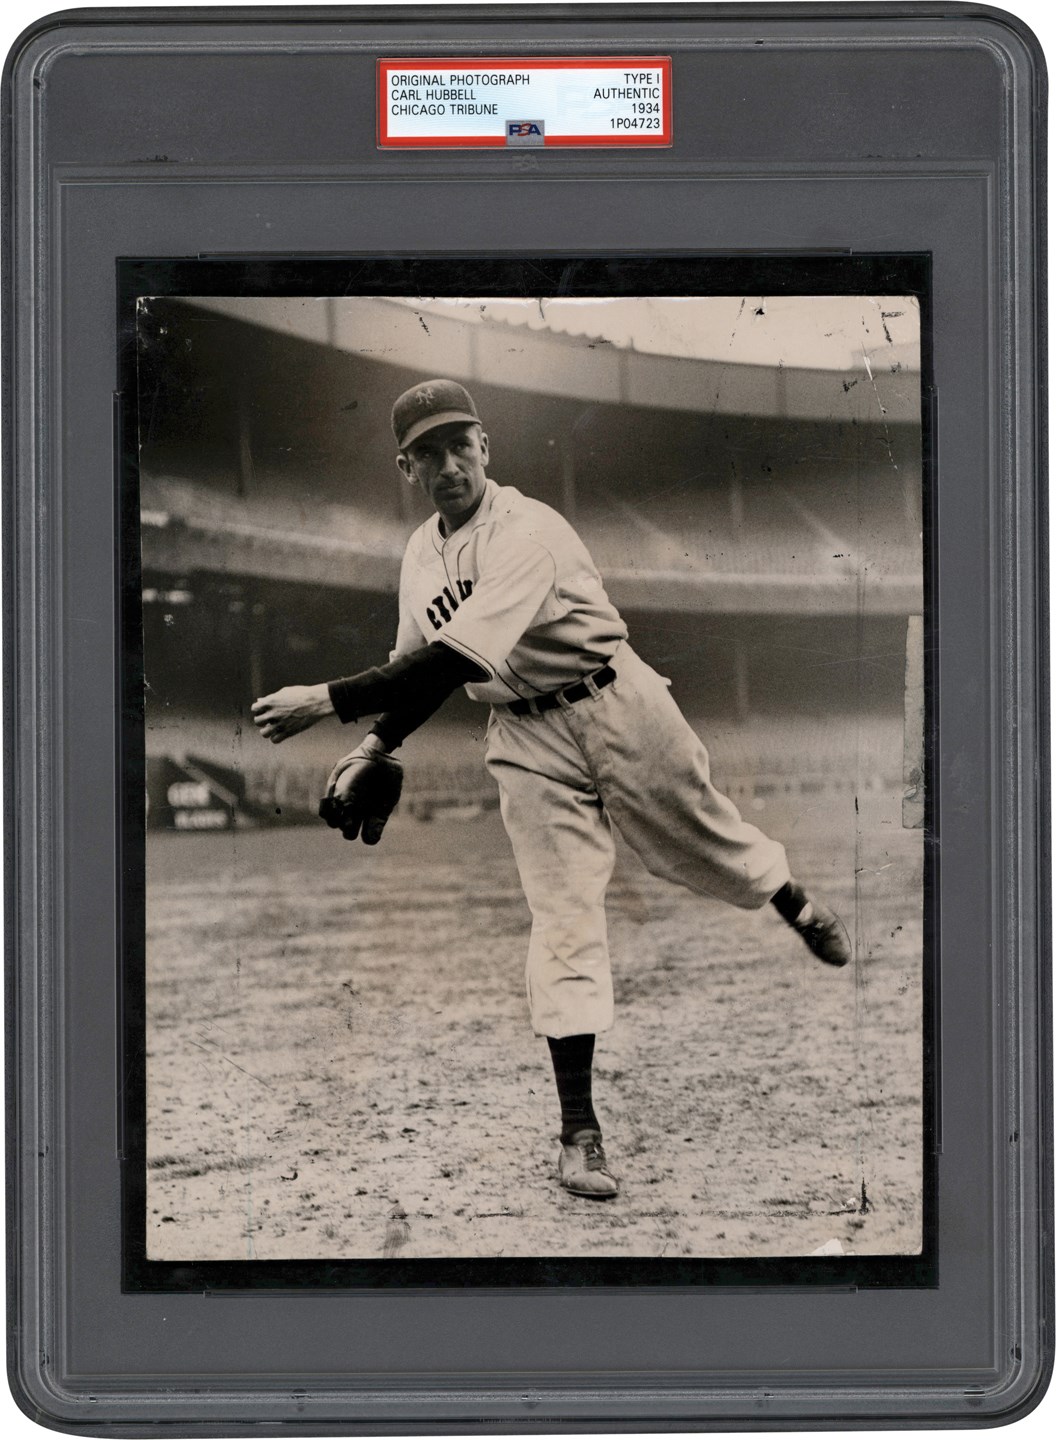 Vintage Sports Photographs - 1934 Carl Hubbell Photograph - Historic 1934 All Star Appearance (PSA Type I)